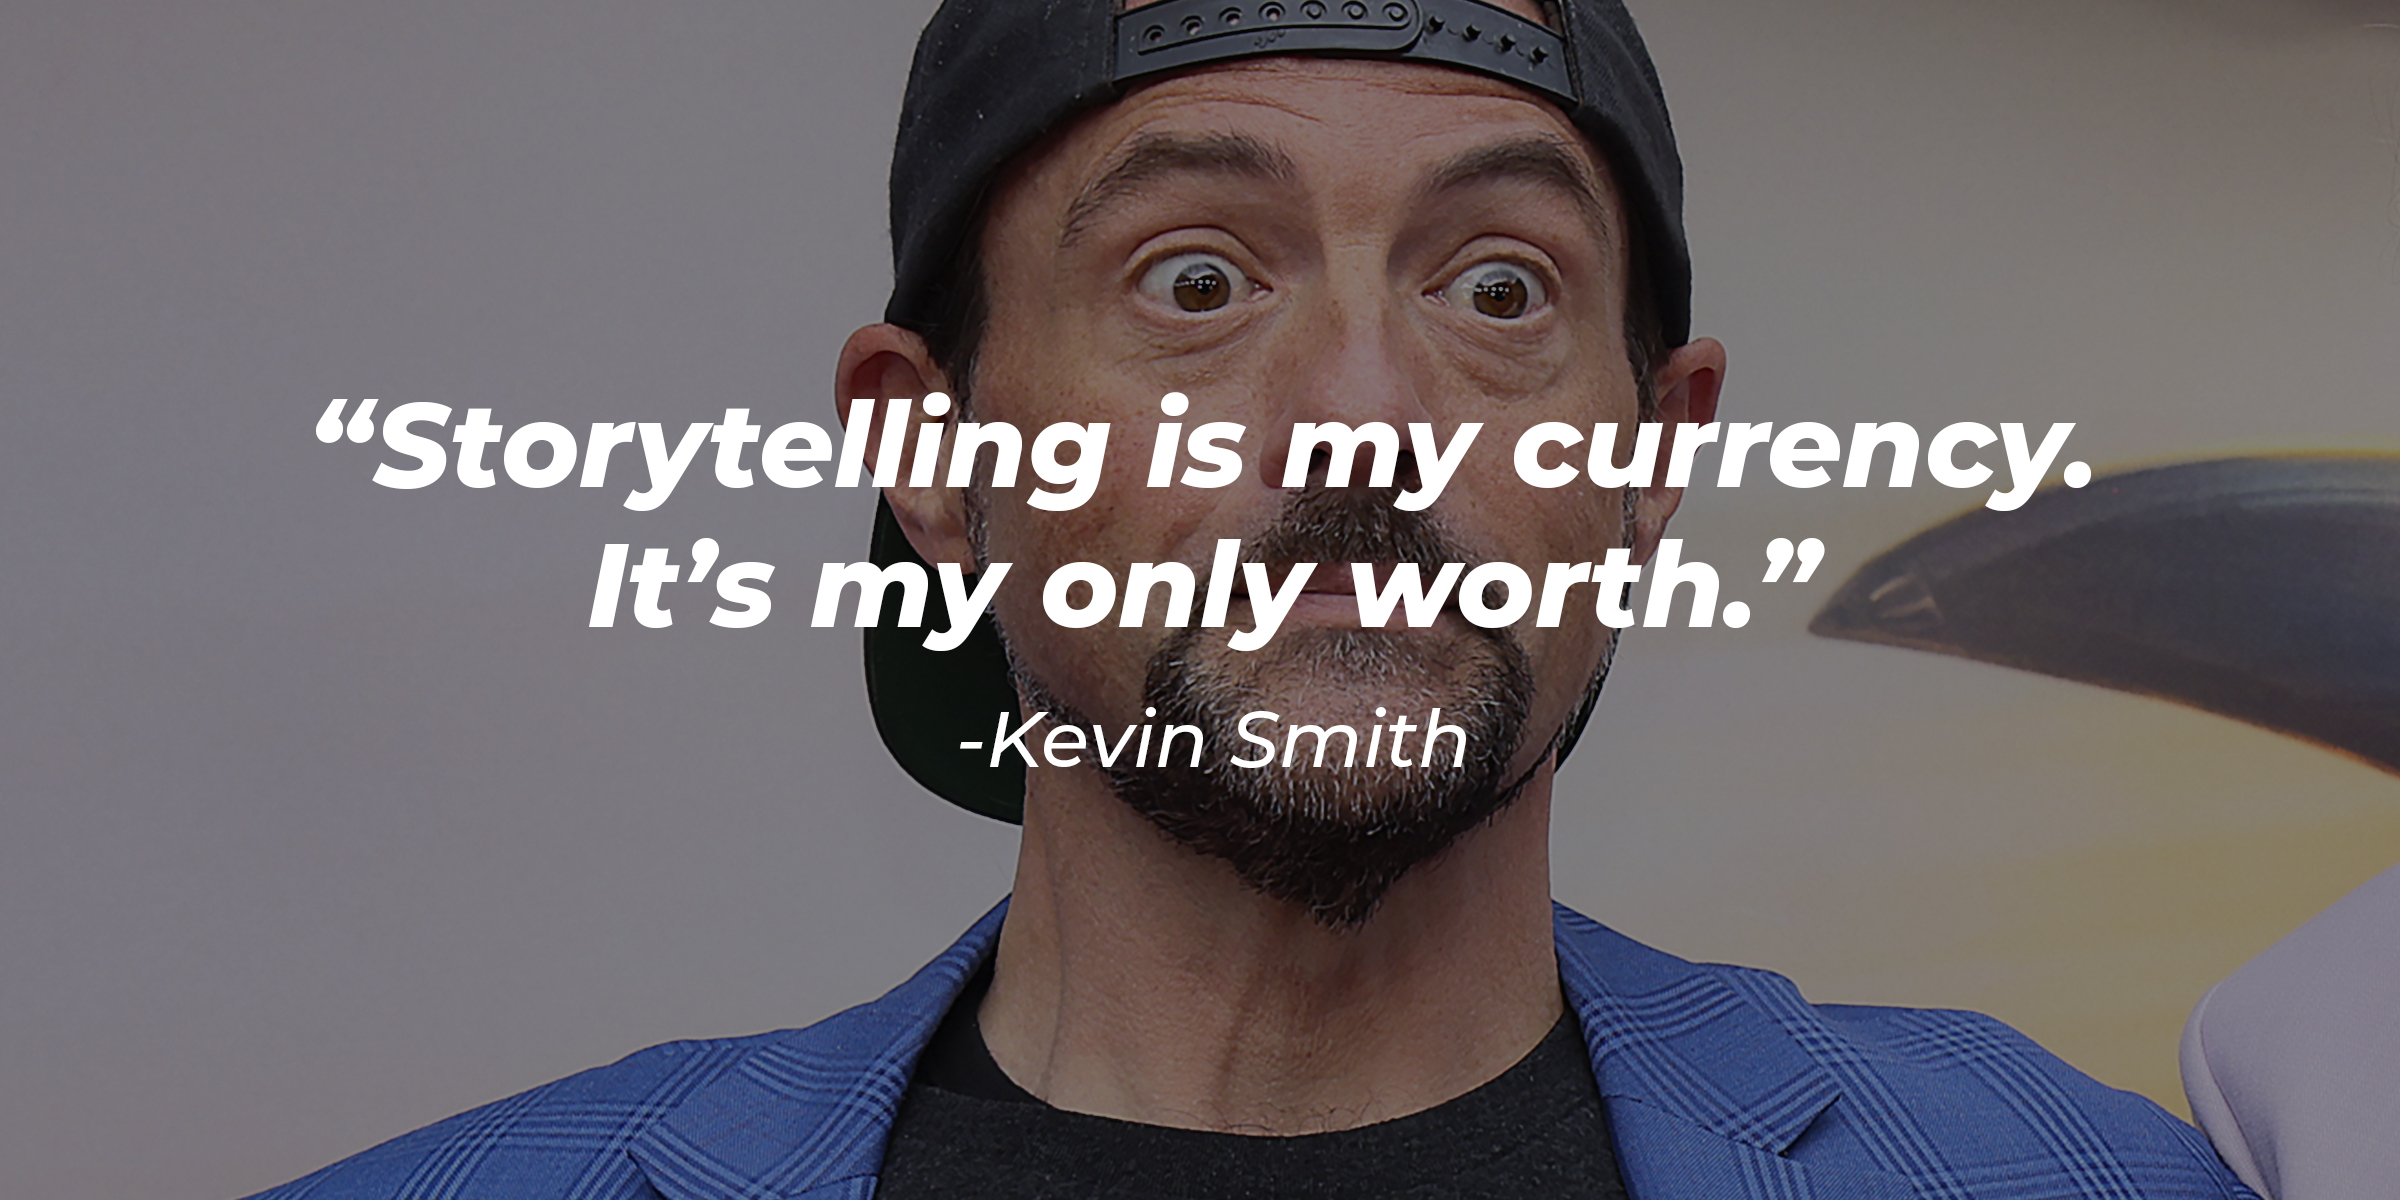 Kevin Smith, with his quote: “Storytelling is my currency. It’s my only worth.” | Source: Getty Images